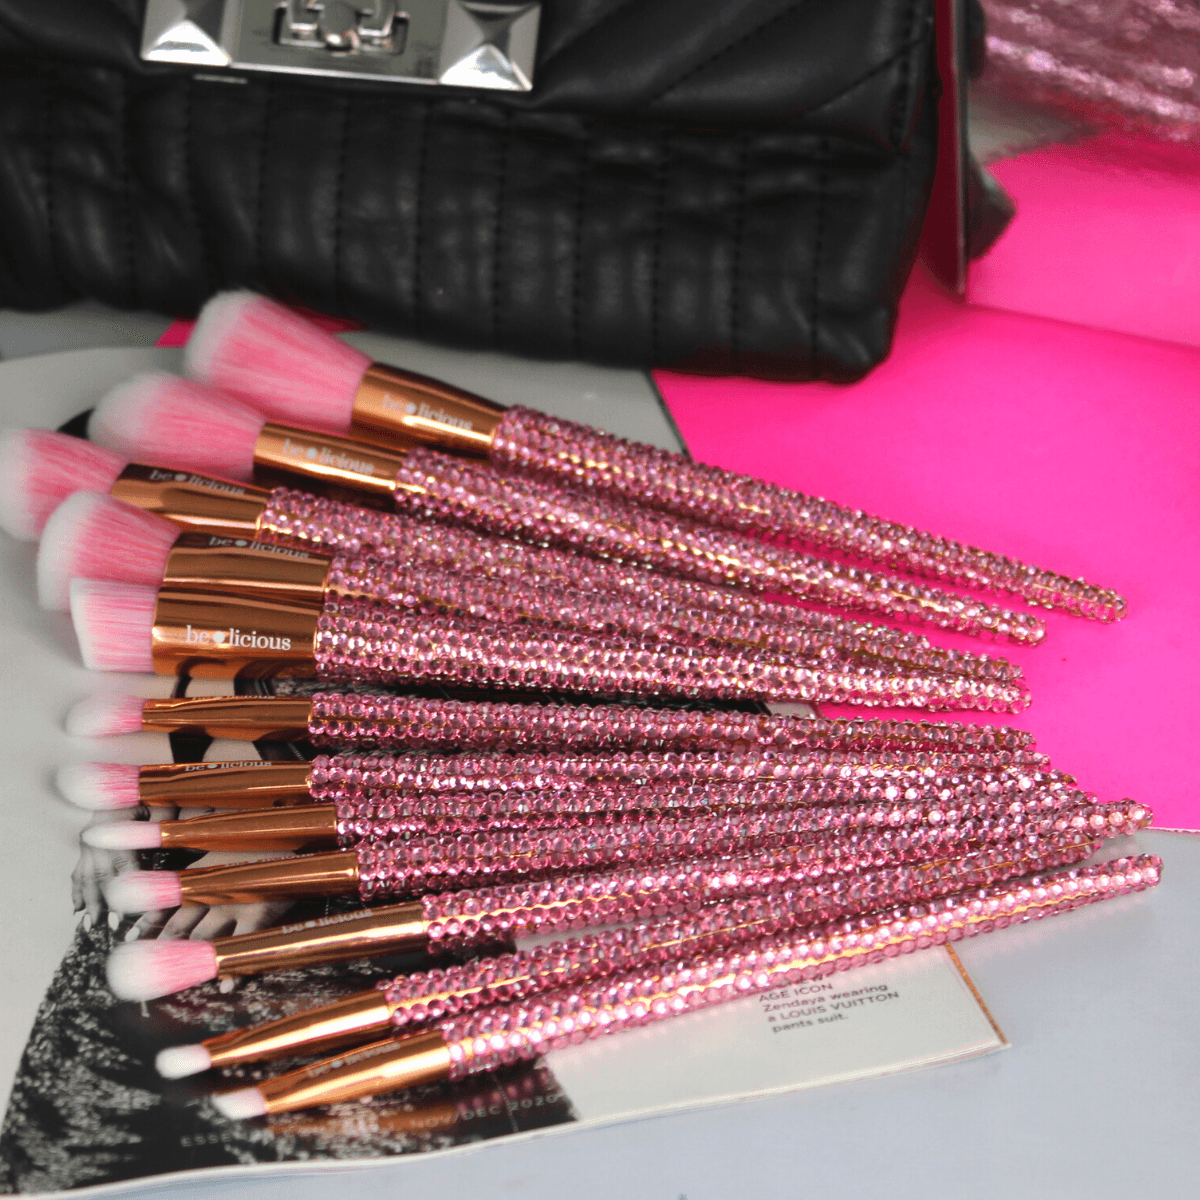 12 Piece Bling Rhinestone Makeup Brushes - She's A Beat Beauty